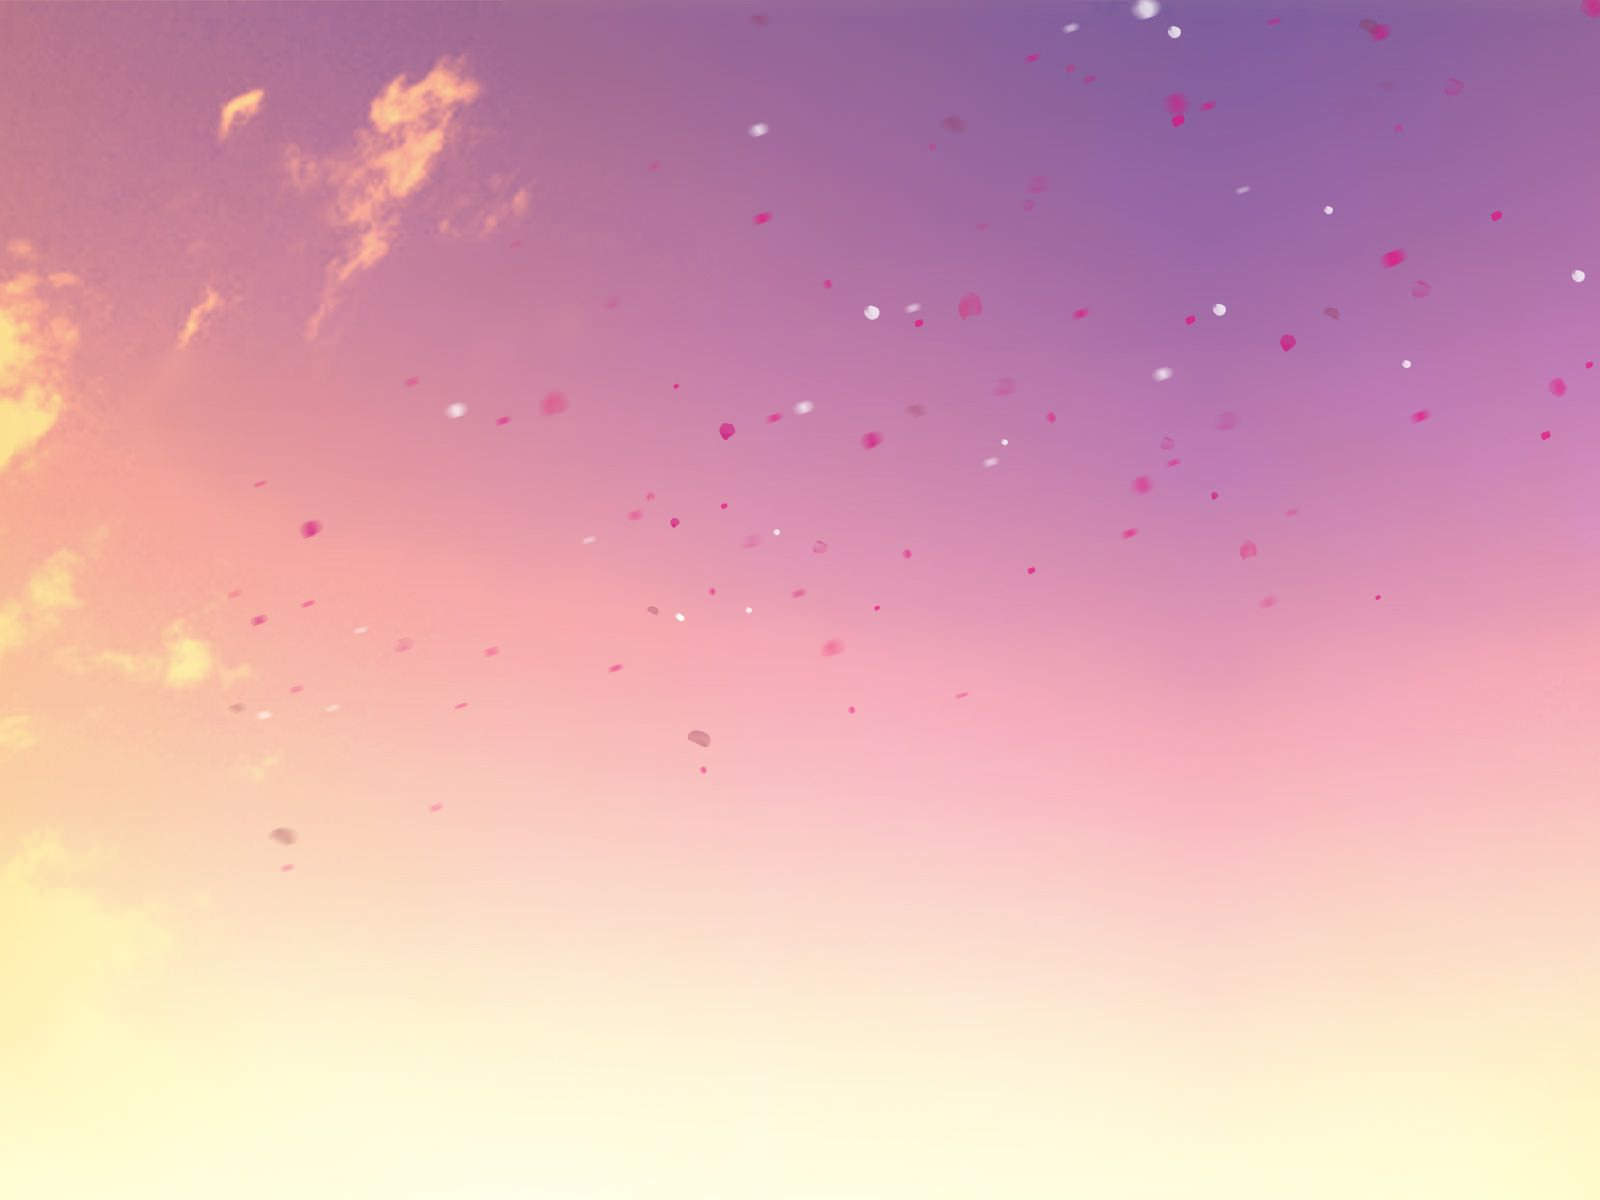 FREE 22+ Pastel Wallpapers in PSD | Vector EPS